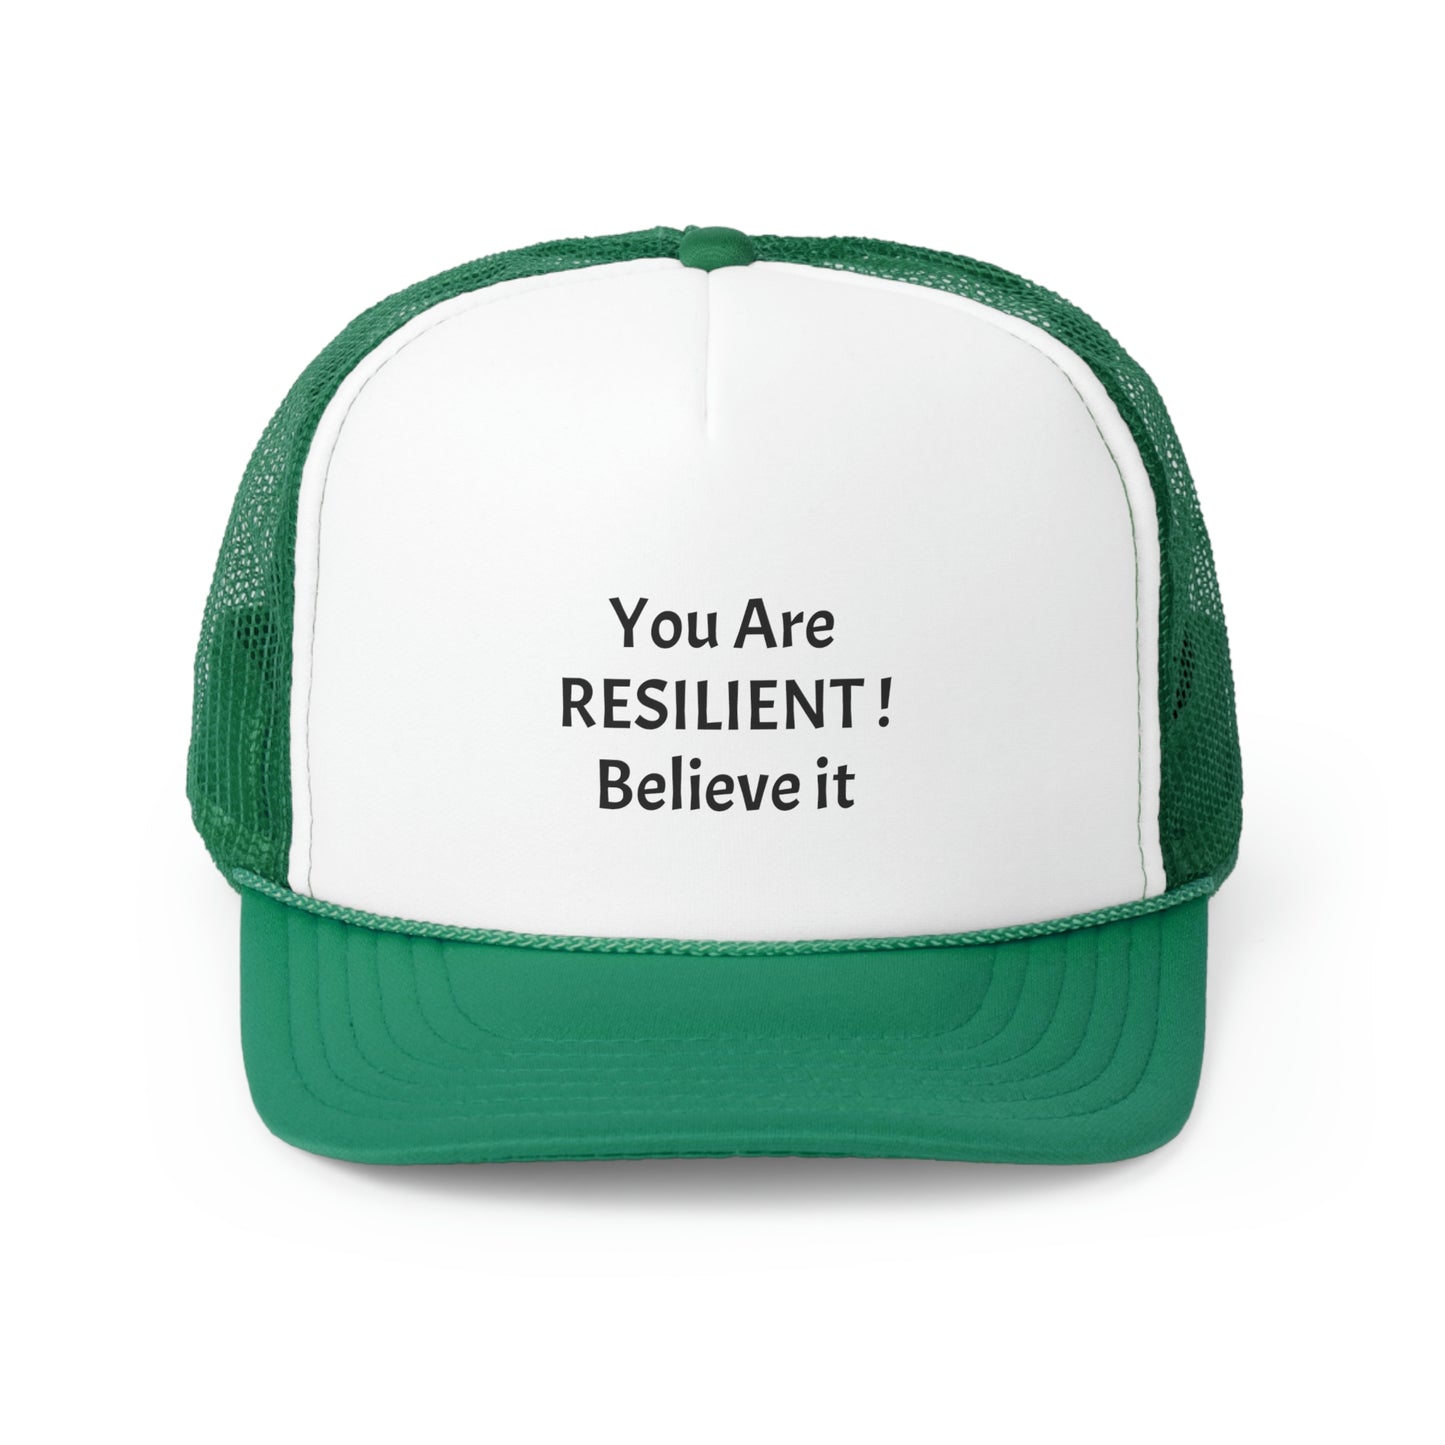 You Are Resilient ! Trucker Caps